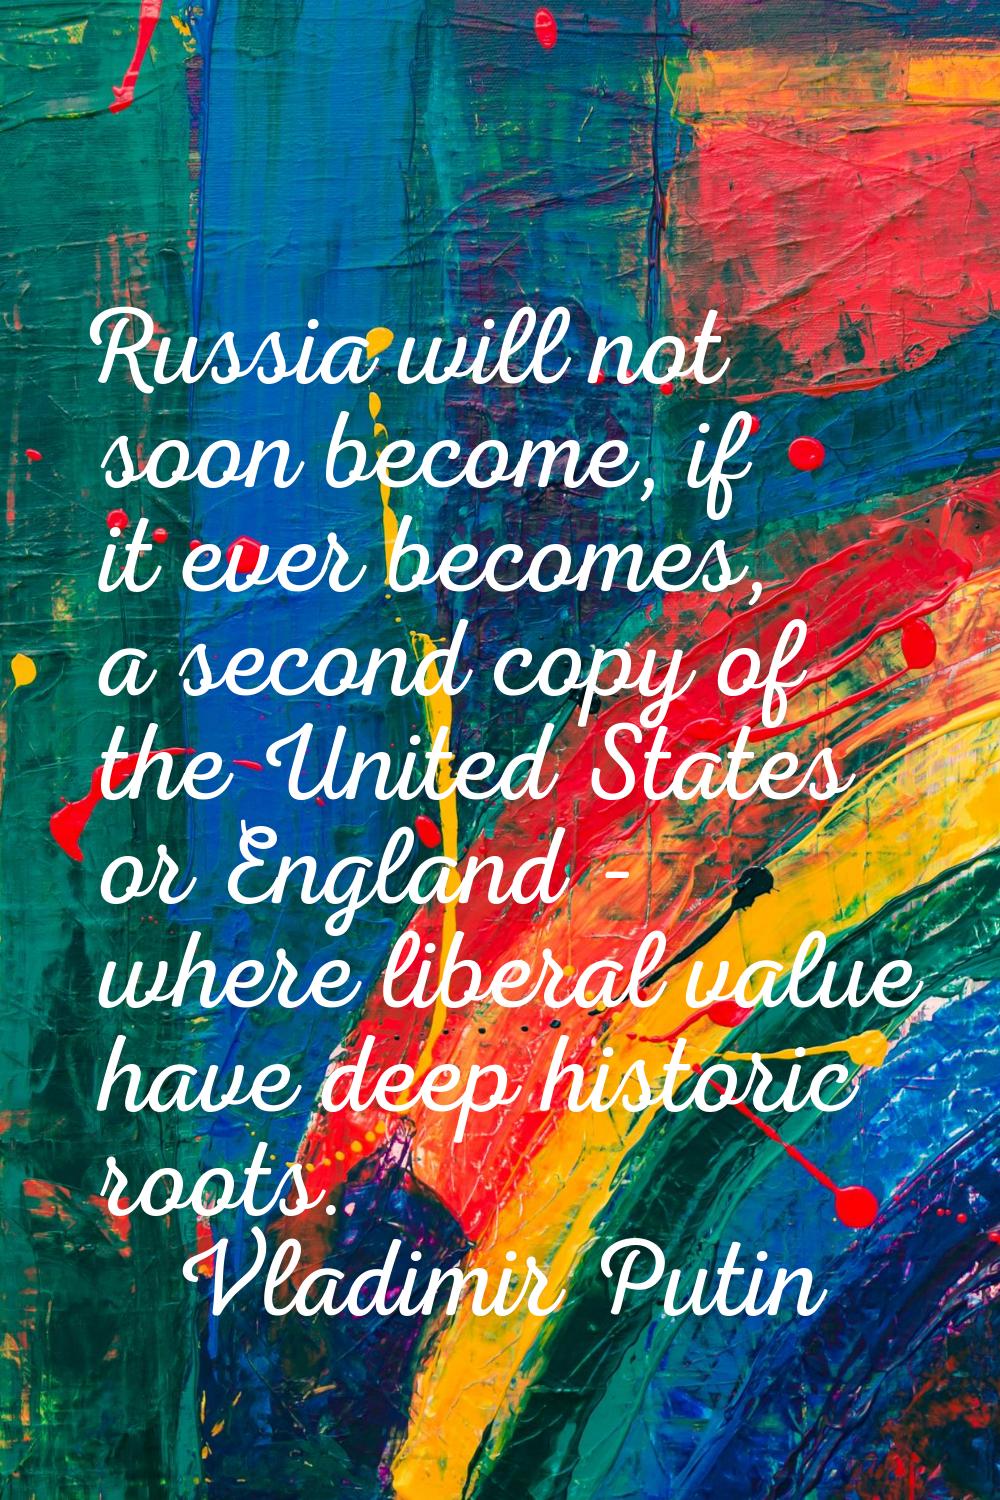 Russia will not soon become, if it ever becomes, a second copy of the United States or England - wh